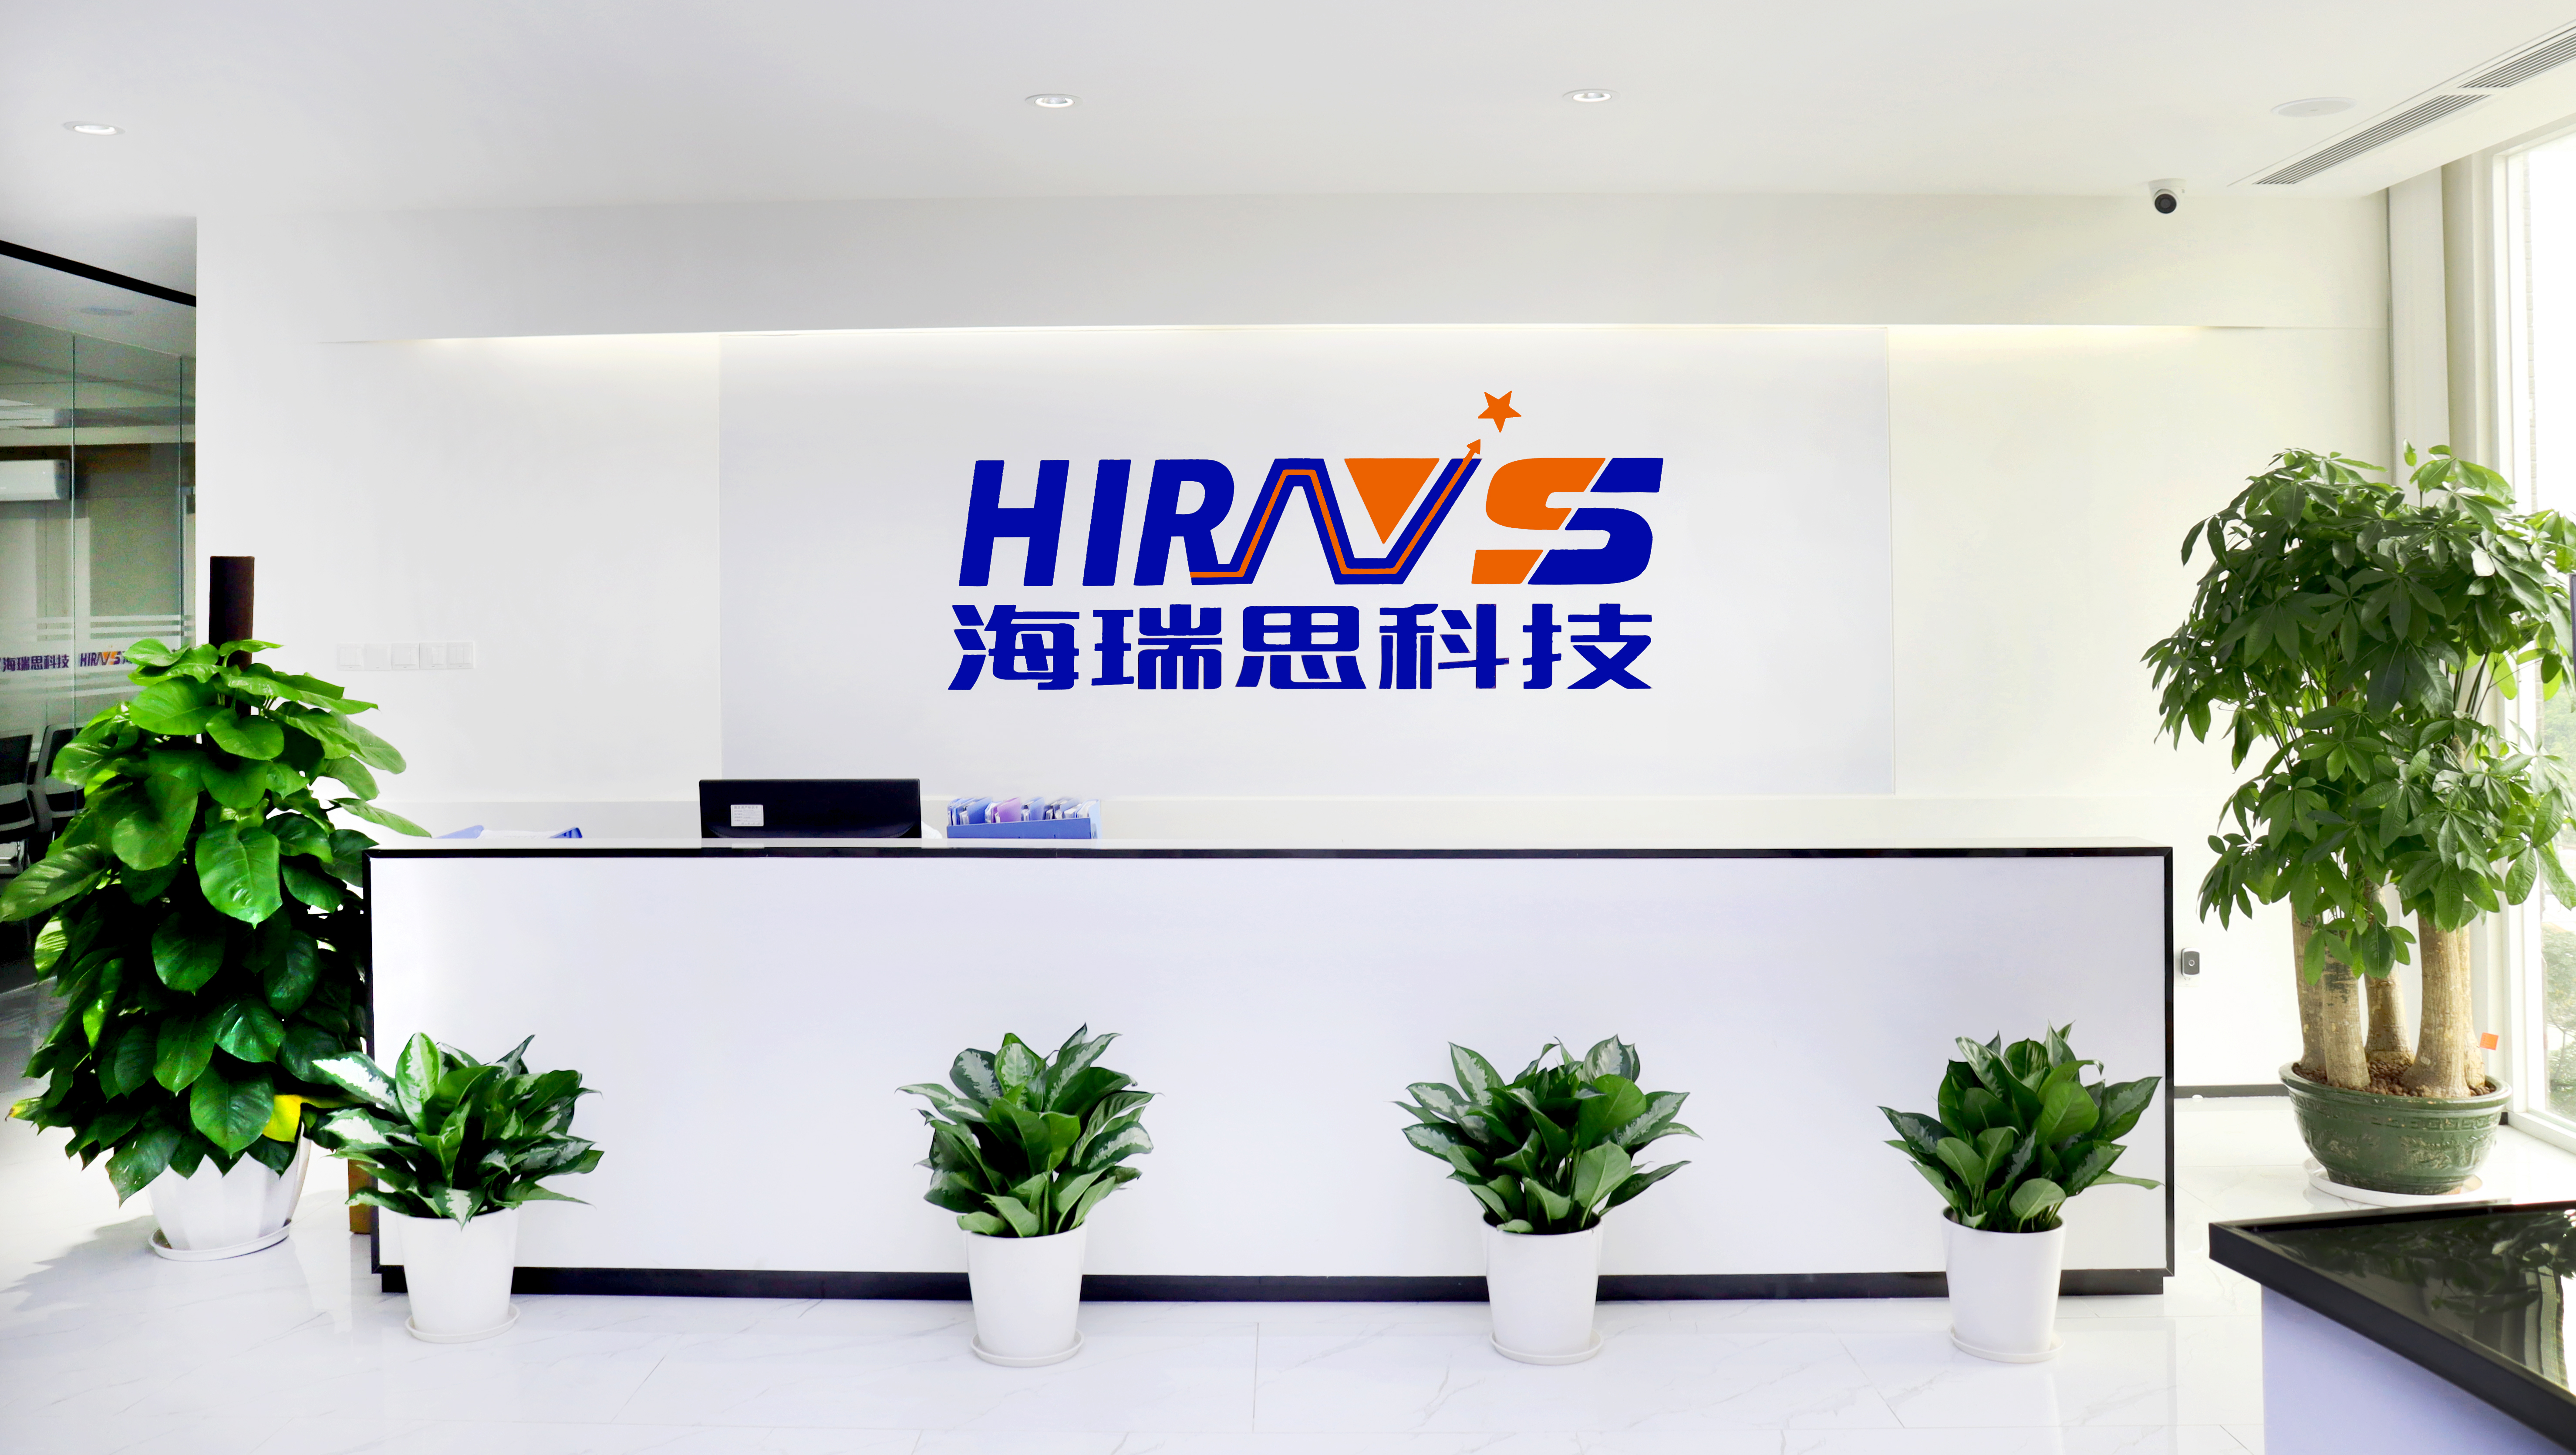 About hirays--air leak tester company!